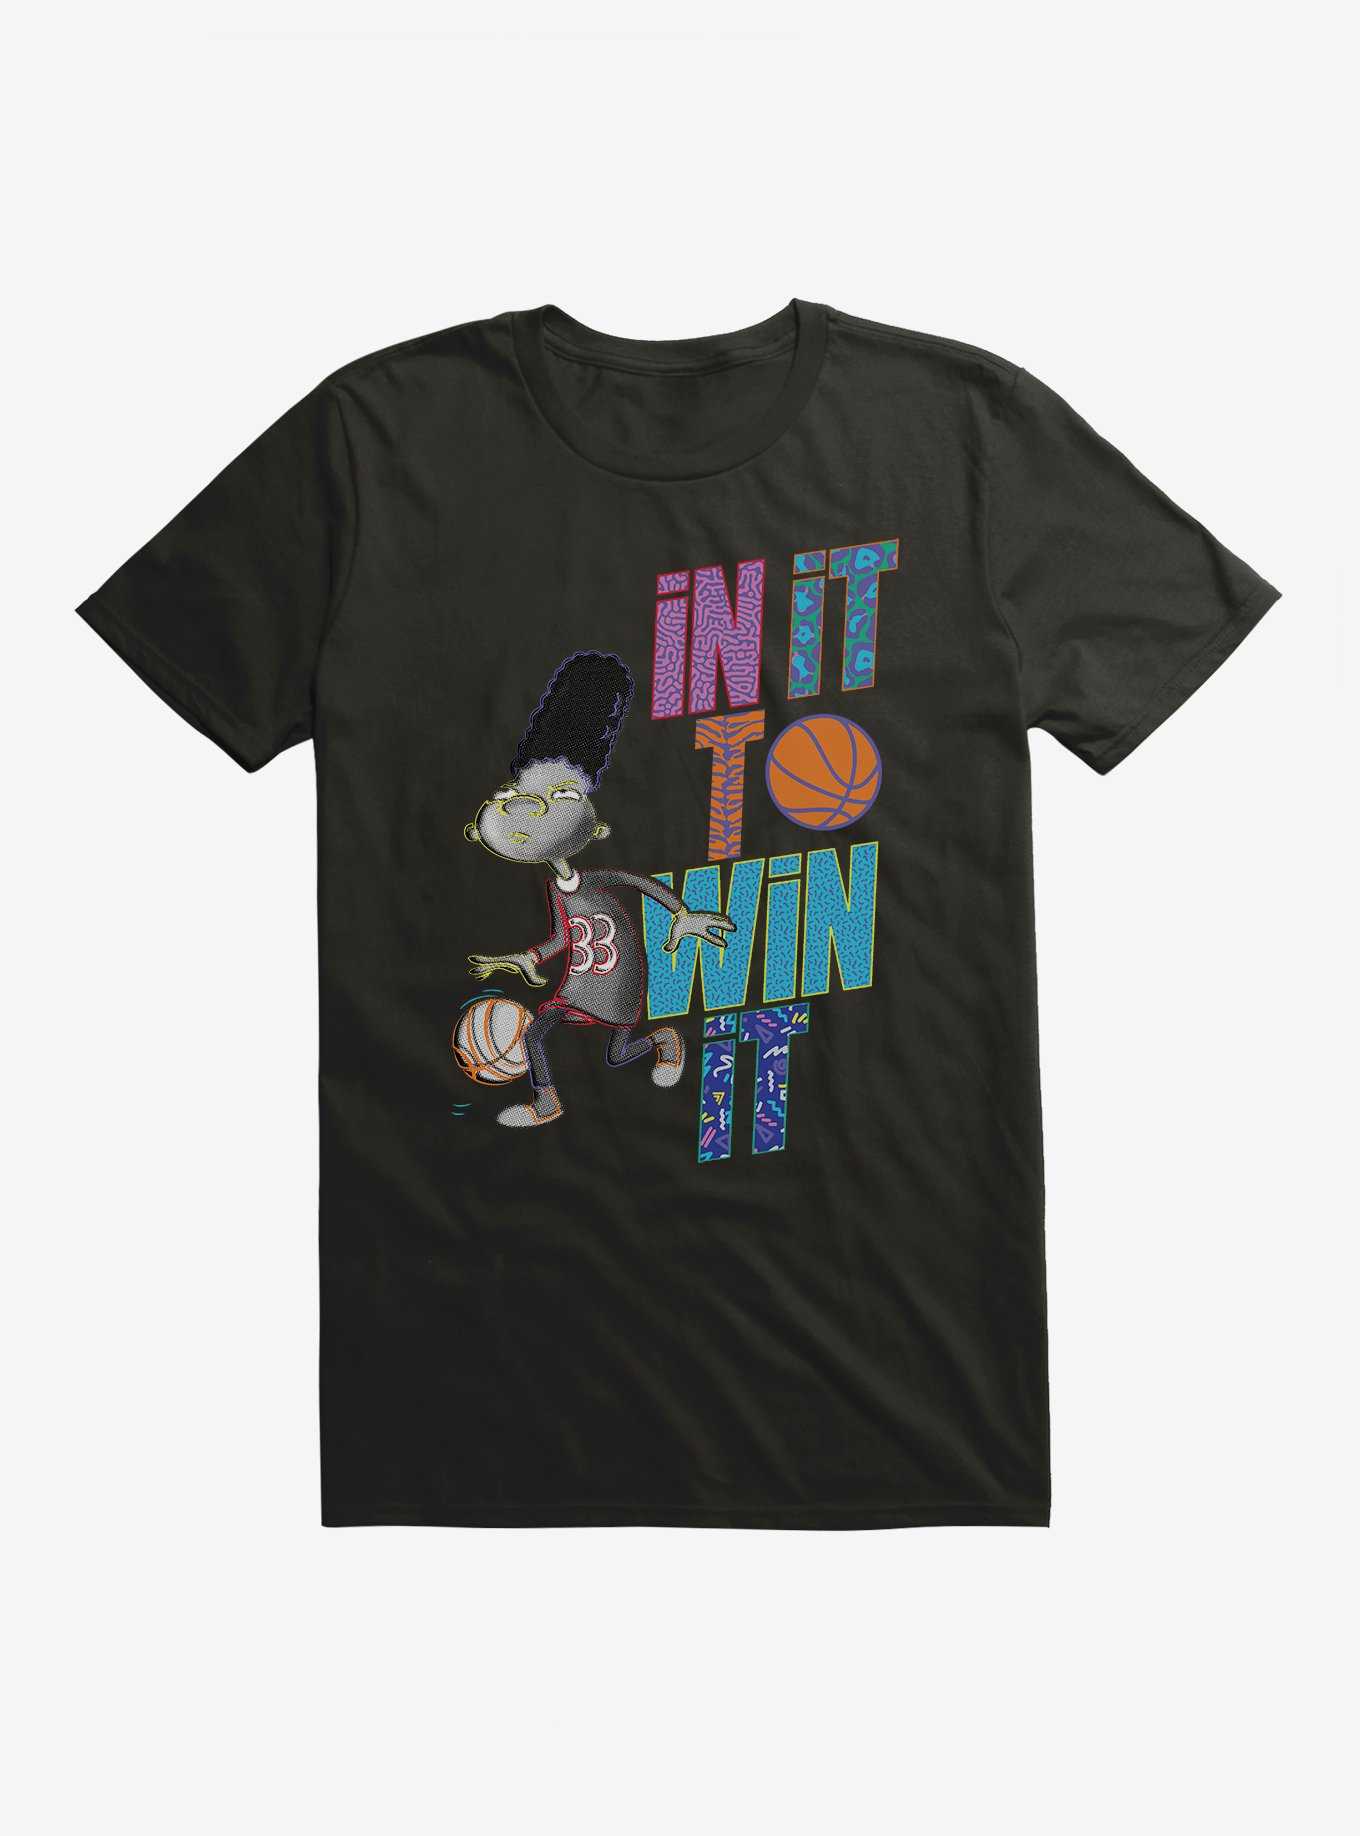 Hey Arnold! In It To Win It T-Shirt, , hi-res